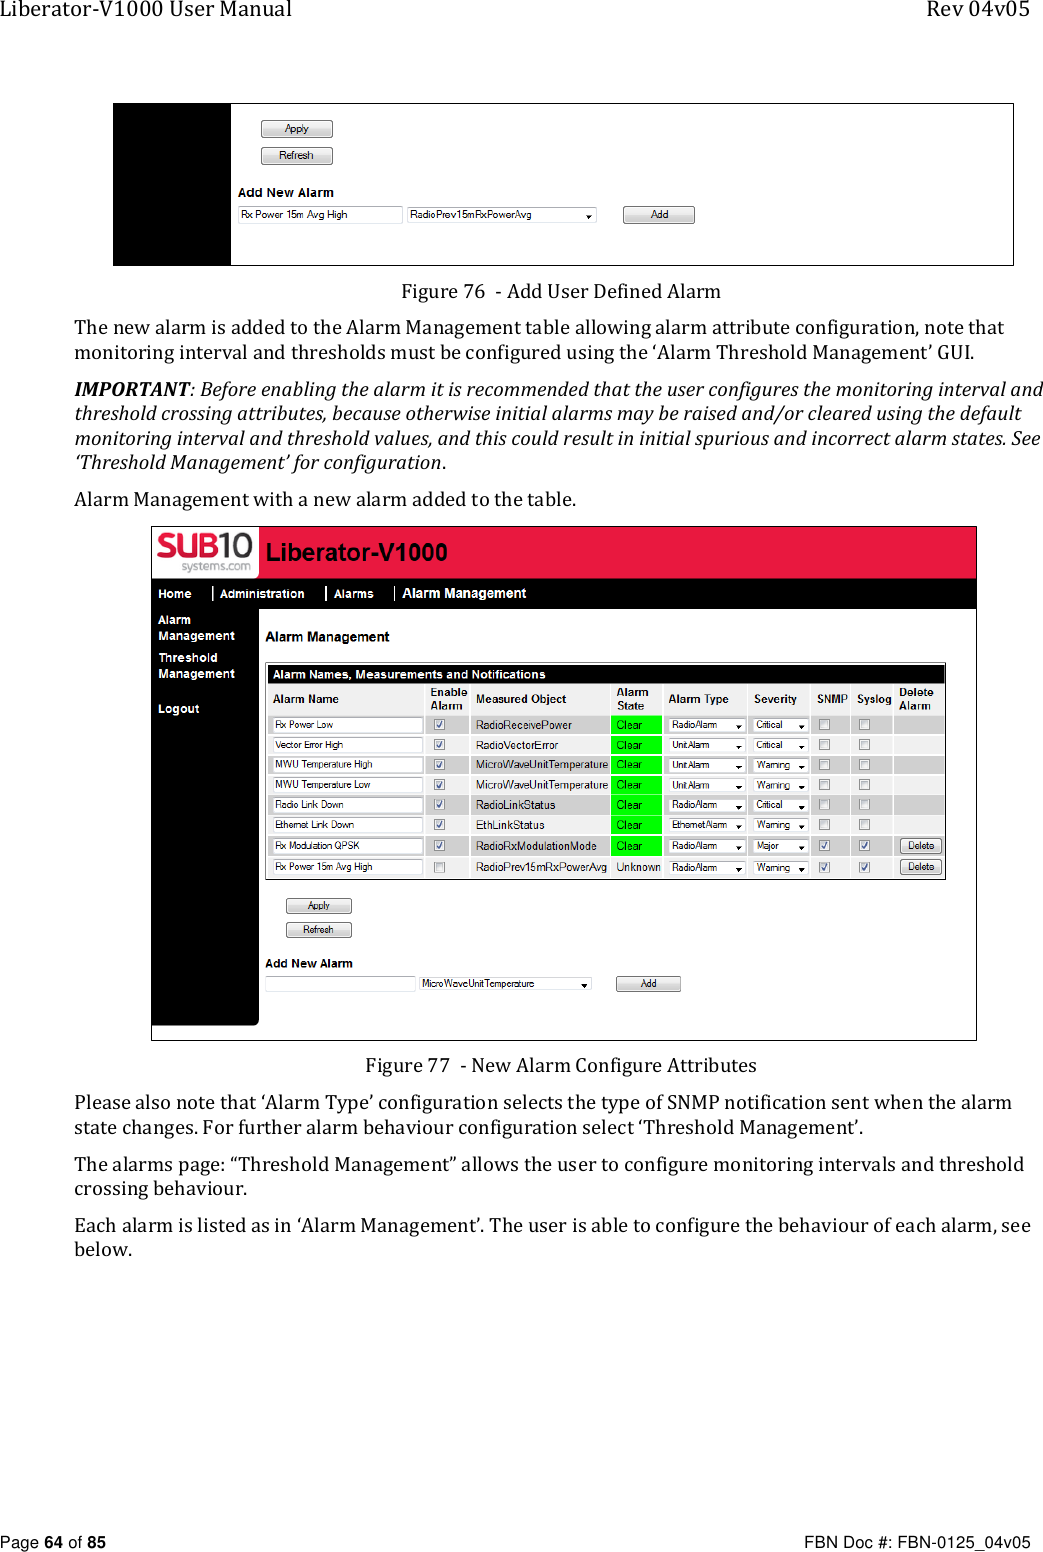 Liberator-V1000 User Manual  Rev 04v05     Page 64 of 85   FBN Doc #: FBN-0125_04v05  Figure 76  - Add User Defined Alarm The new alarm is added to the Alarm Management table allowing alarm attribute configuration, note that monitoring interval and thresholds must be configured using the ‘Alarm Threshold Management’ GUI. IMPORTANT: Before enabling the alarm it is recommended that the user configures the monitoring interval and threshold crossing attributes, because otherwise initial alarms may be raised and/or cleared using the default monitoring interval and threshold values, and this could result in initial spurious and incorrect alarm states. See ‘Threshold Management’ for configuration. Alarm Management with a new alarm added to the table.  Figure 77  - New Alarm Configure Attributes Please also note that ‘Alarm Type’ configuration selects the type of SNMP notification sent when the alarm state changes. For further alarm behaviour configuration select ‘Threshold Management’. The alarms page: “Threshold Management” allows the user to configure monitoring intervals and threshold crossing behaviour. Each alarm is listed as in ‘Alarm Management’. The user is able to configure the behaviour of each alarm, see below. 